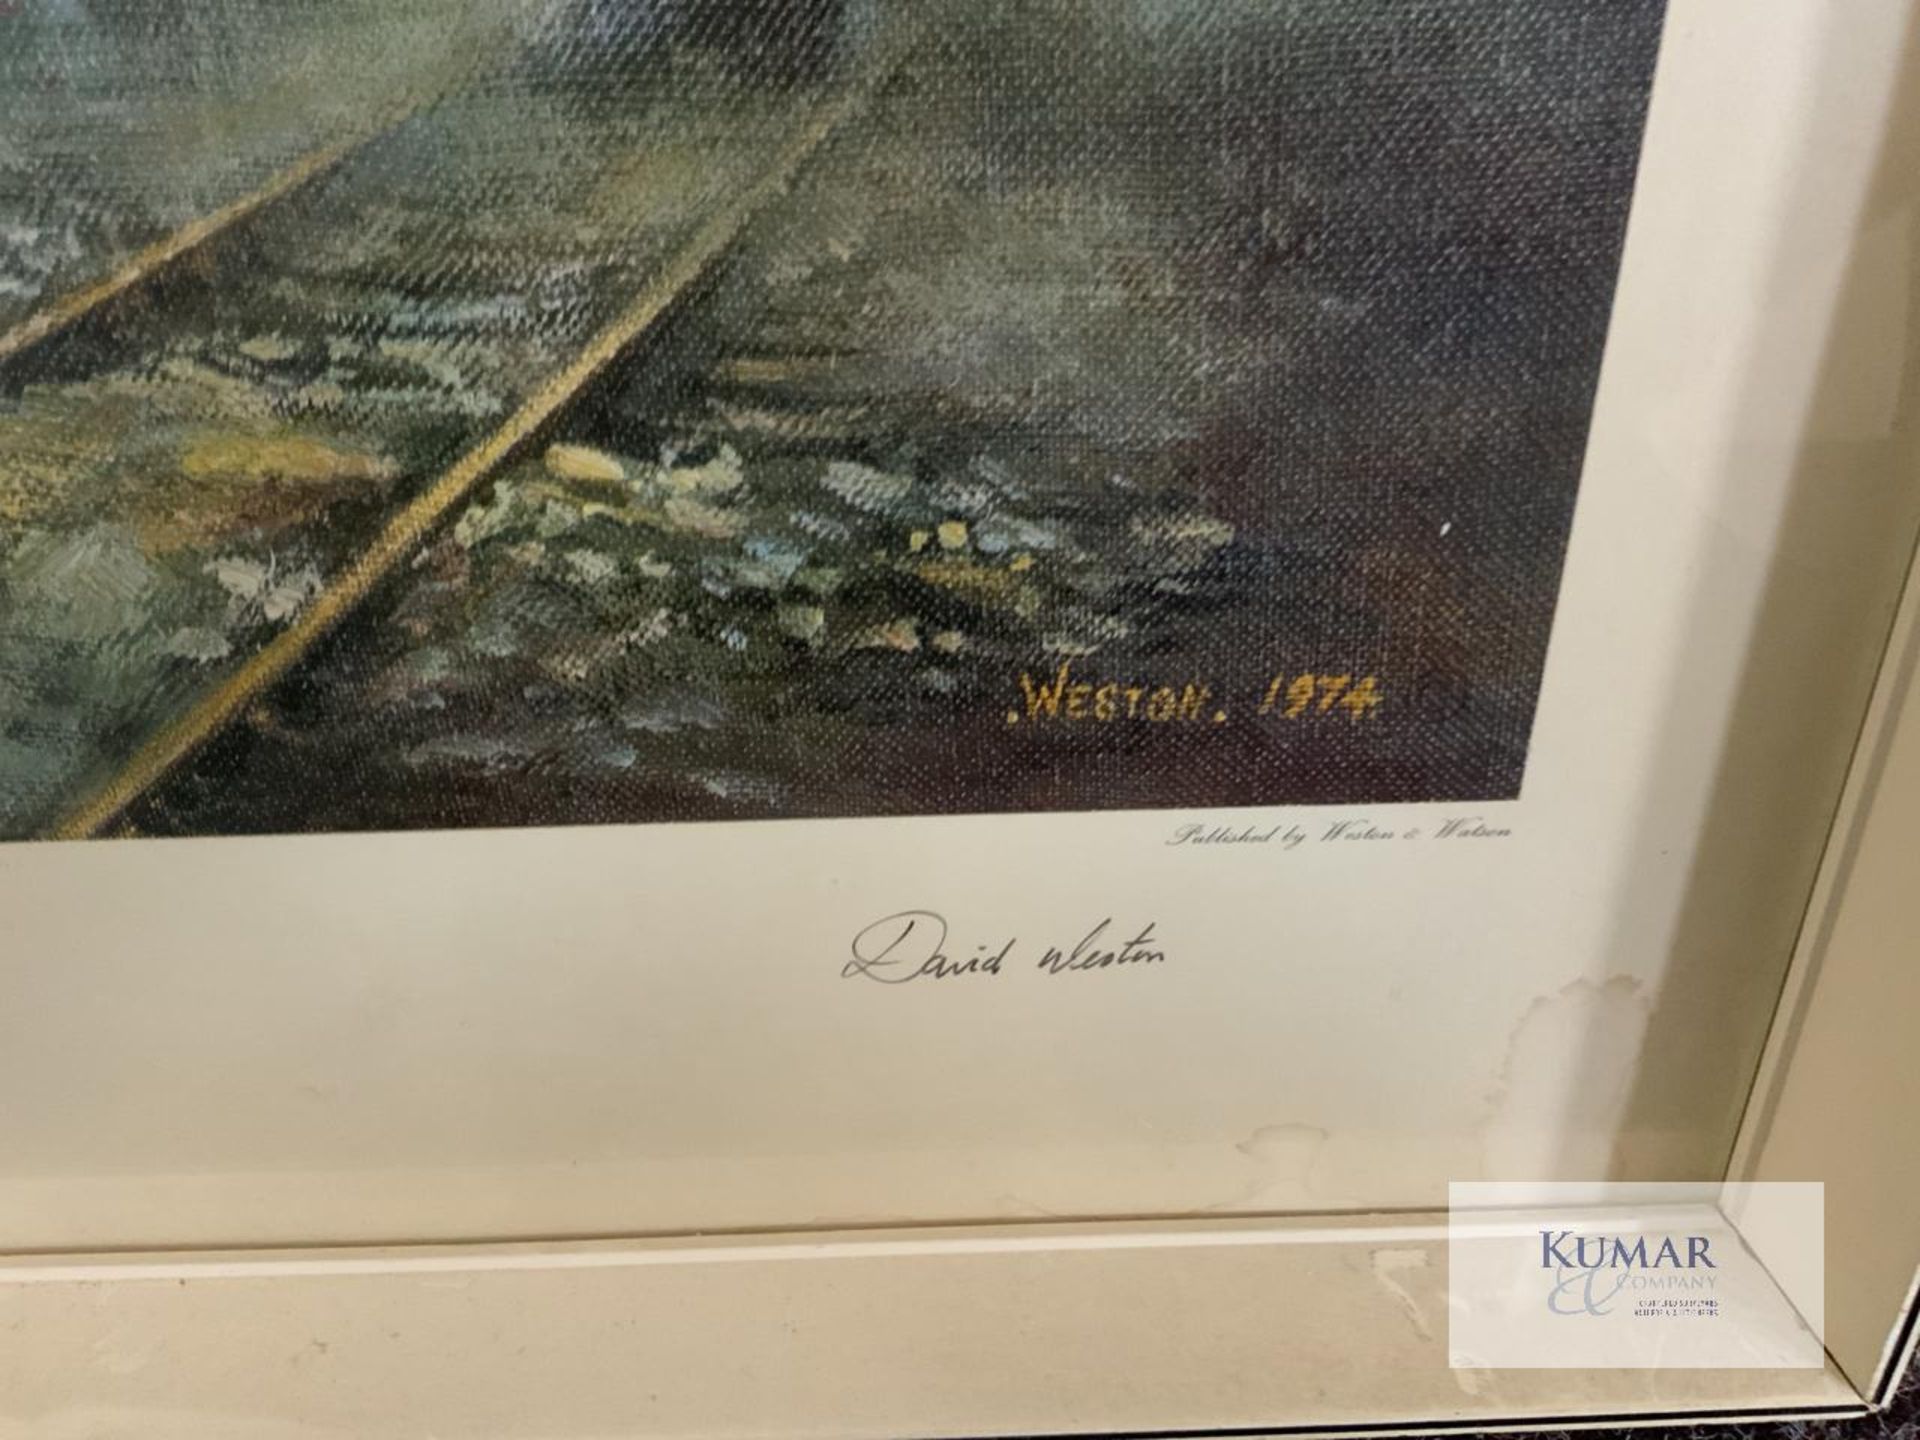 4: Various Pictures, Paintings, Drawings & Picture Frame Etc - Including David Weston 1974 Railway - Image 9 of 10